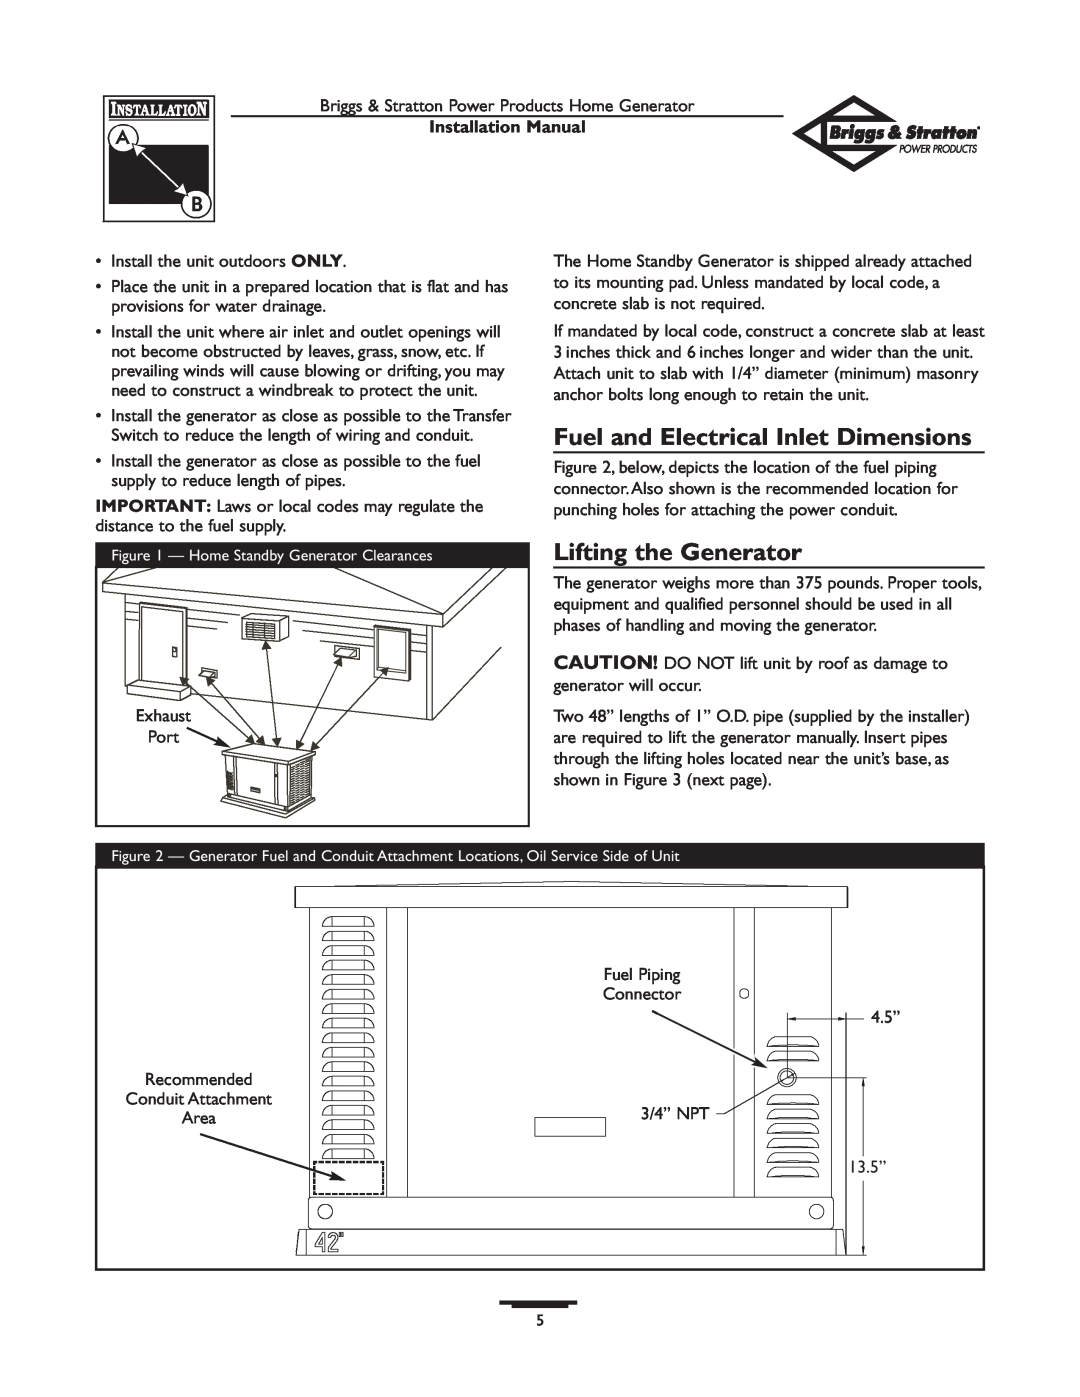 Briggs & Stratton 01938-0 manual Fuel and Electrical Inlet Dimensions, Lifting the Generator, Installation Manual 